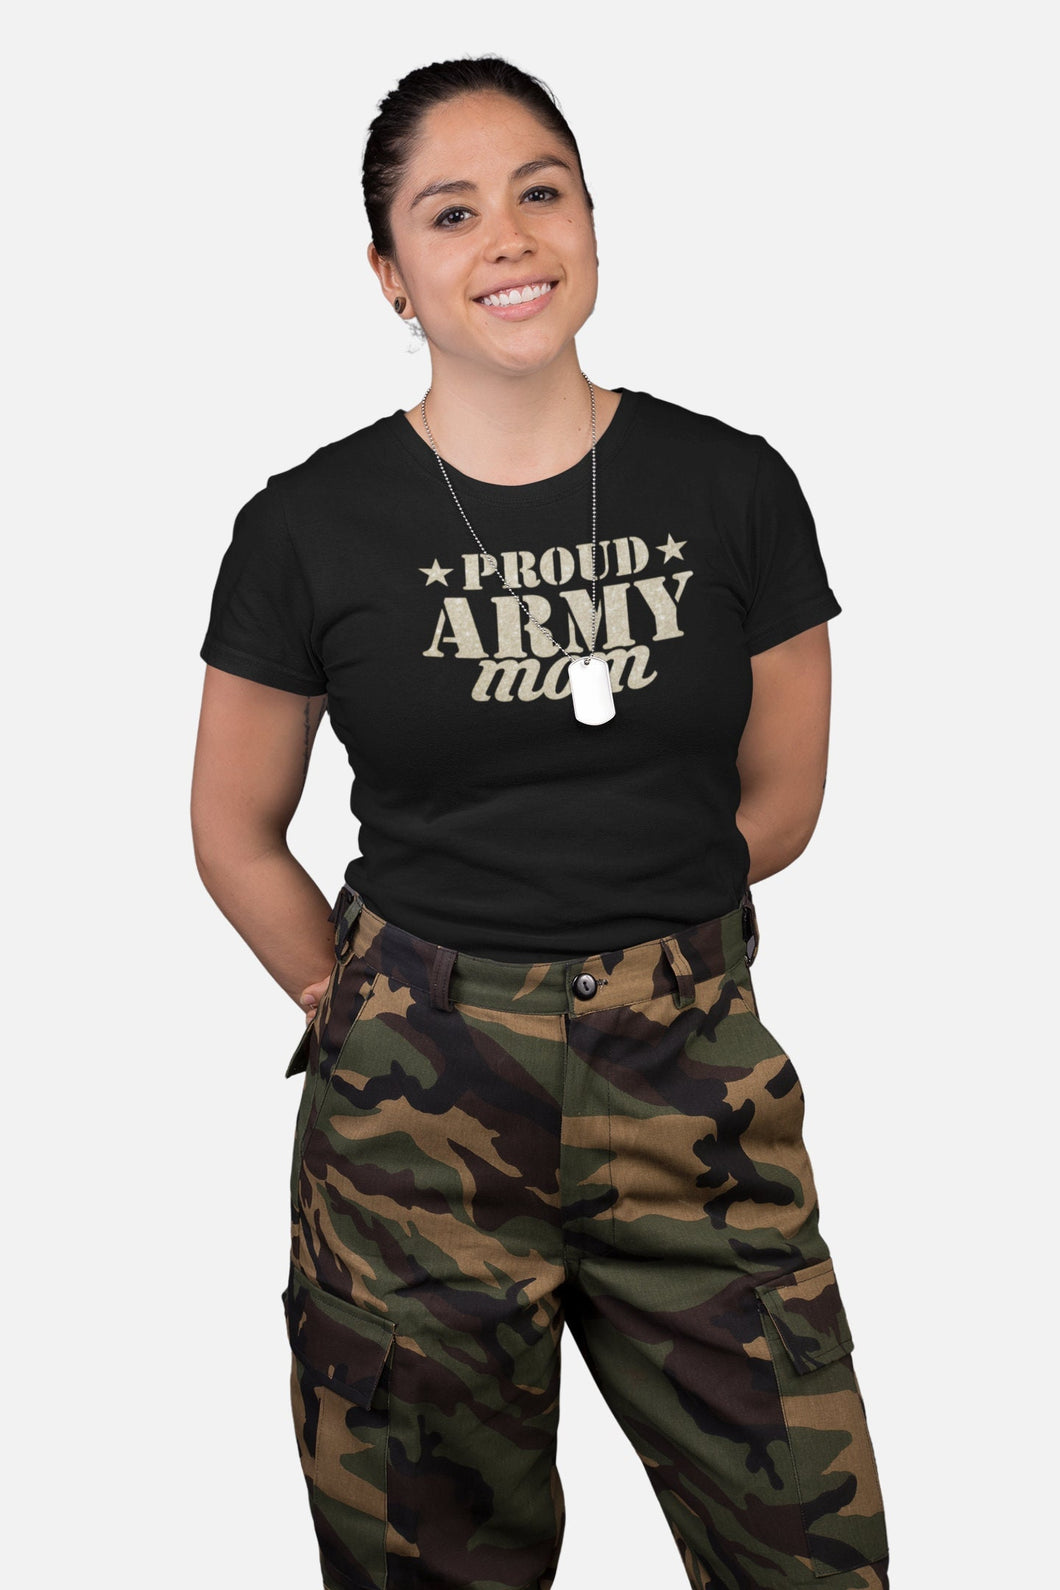 Proud Army Mom T Shirt, Proud Army National Guard, Military Mom Gift